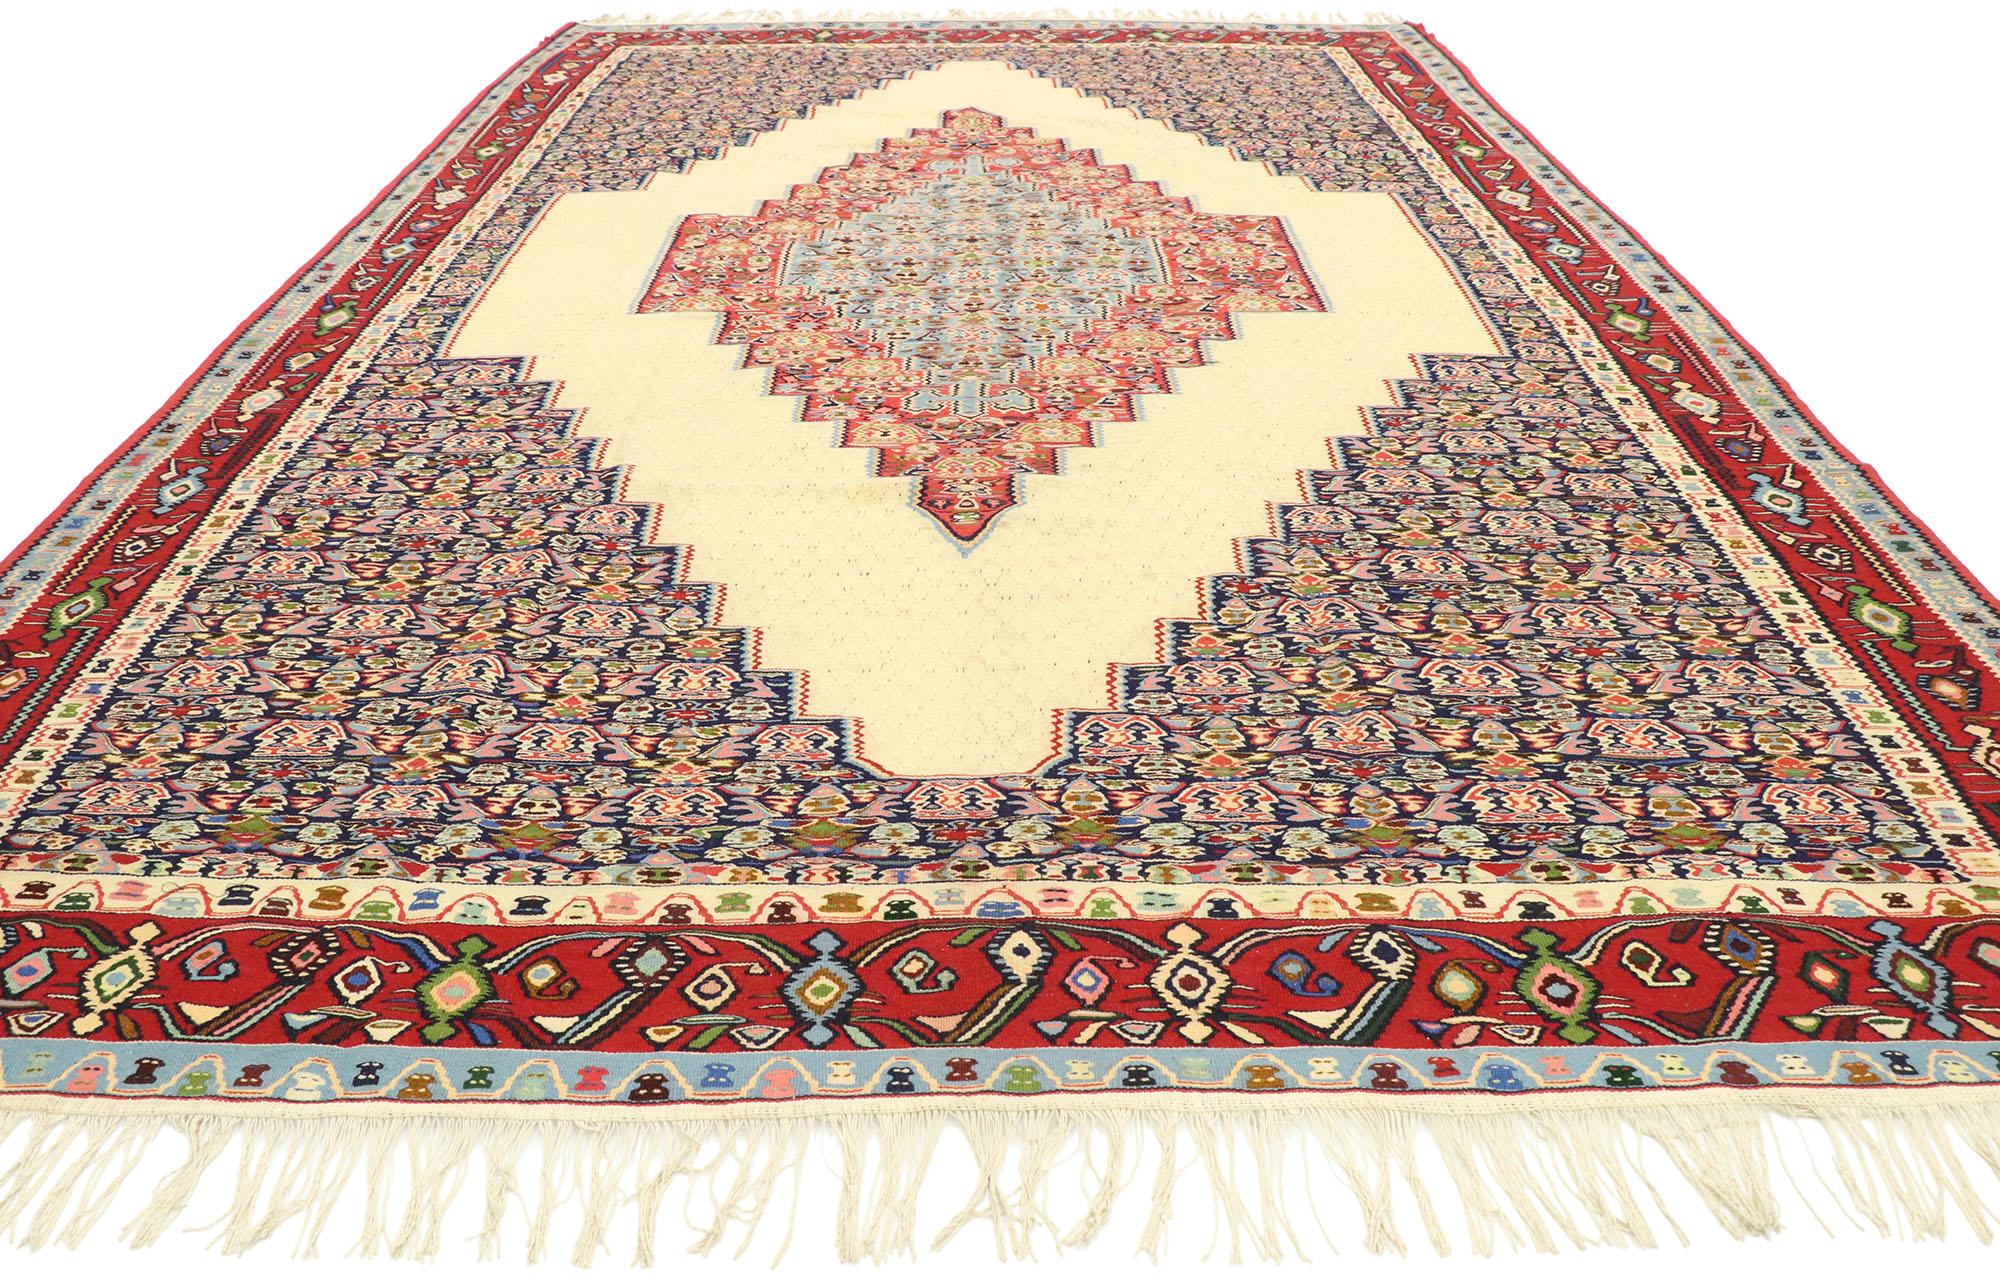 Hand-Woven Vintage Persian Kilim Rug with Modern Rustic Tribal Adirondack Lodge Style For Sale